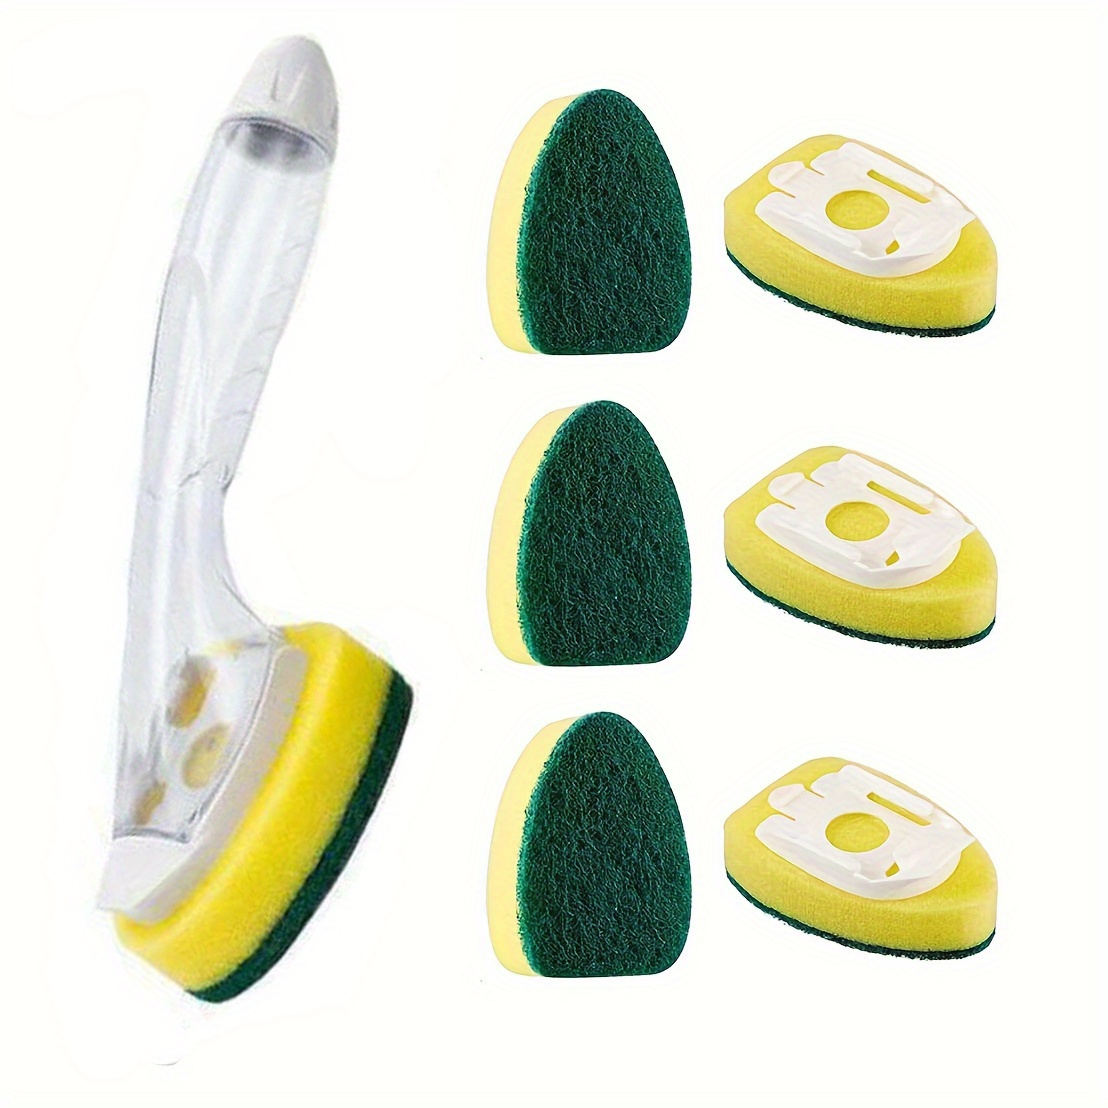 2 Pack Dish Sponge Scrubber Brush with Handle Soap Dispenser and 2 Dish  Wand Refills Sponge Heads, Silicone Dish Cleaning Brush Scrubber Set for  Usage